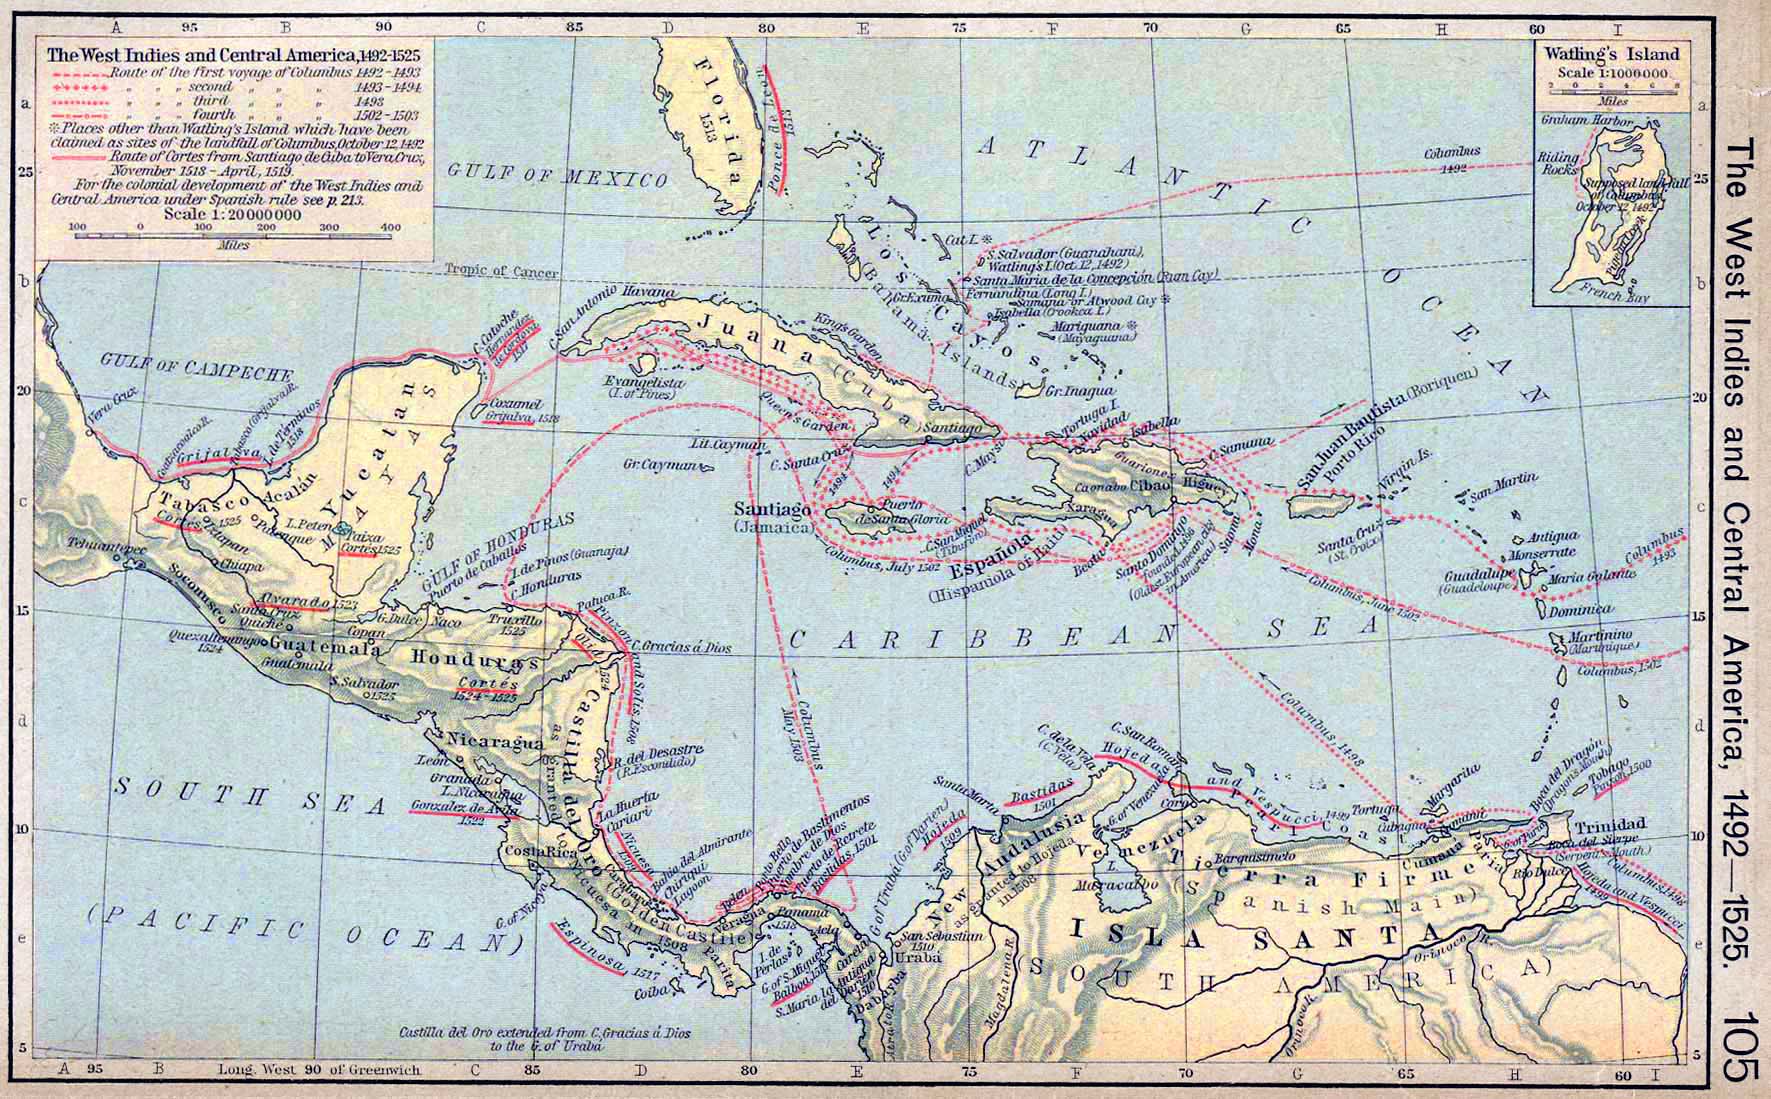 Map of the West Indies and Central America 1492-1525